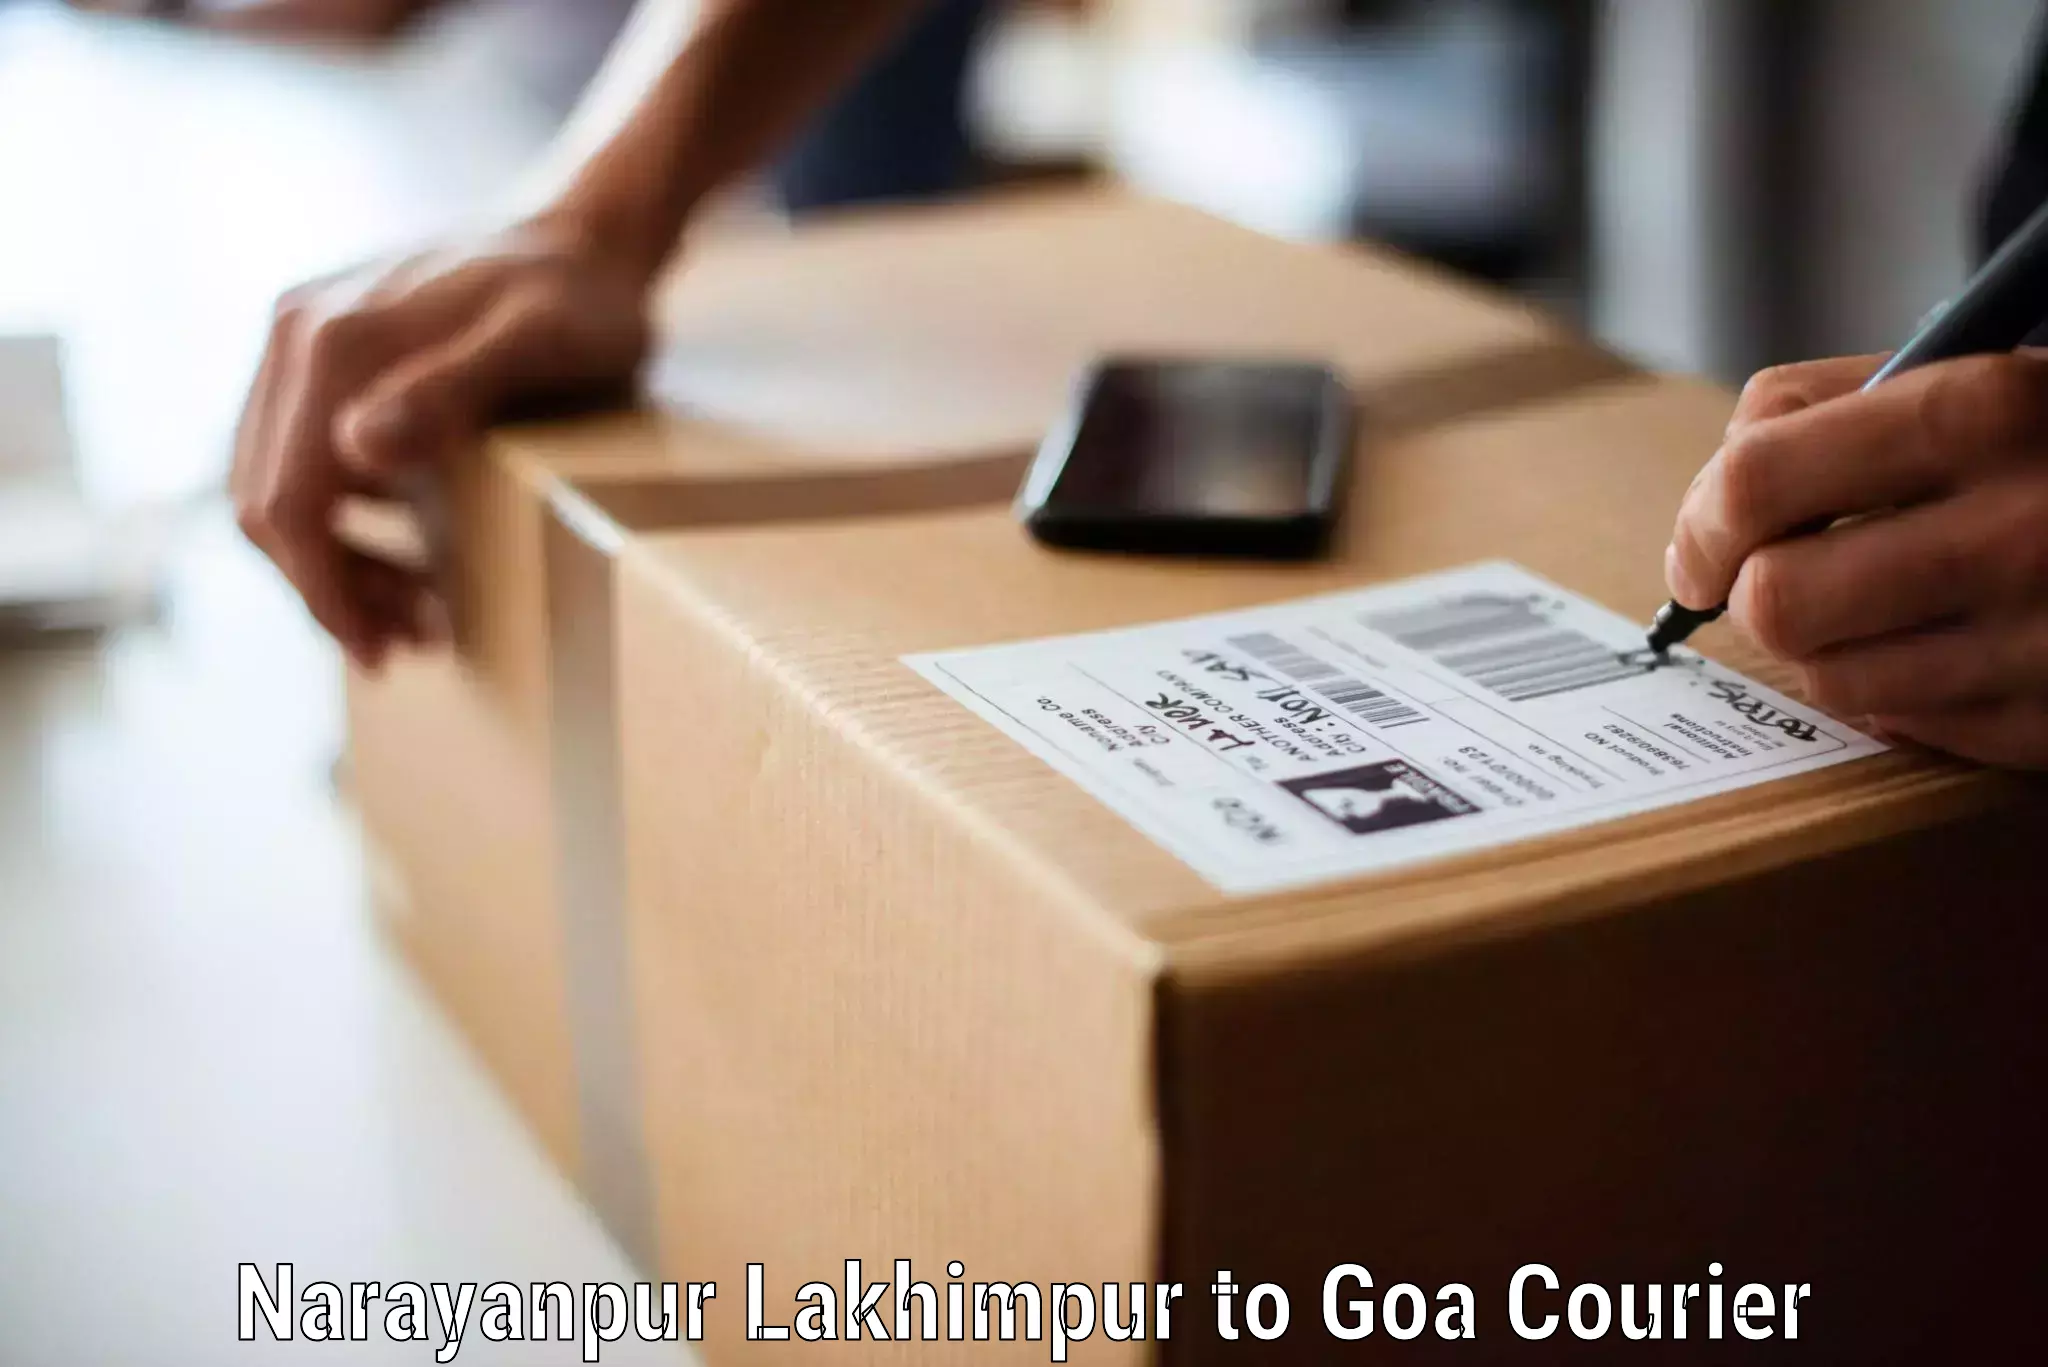 Affordable relocation services Narayanpur Lakhimpur to Goa